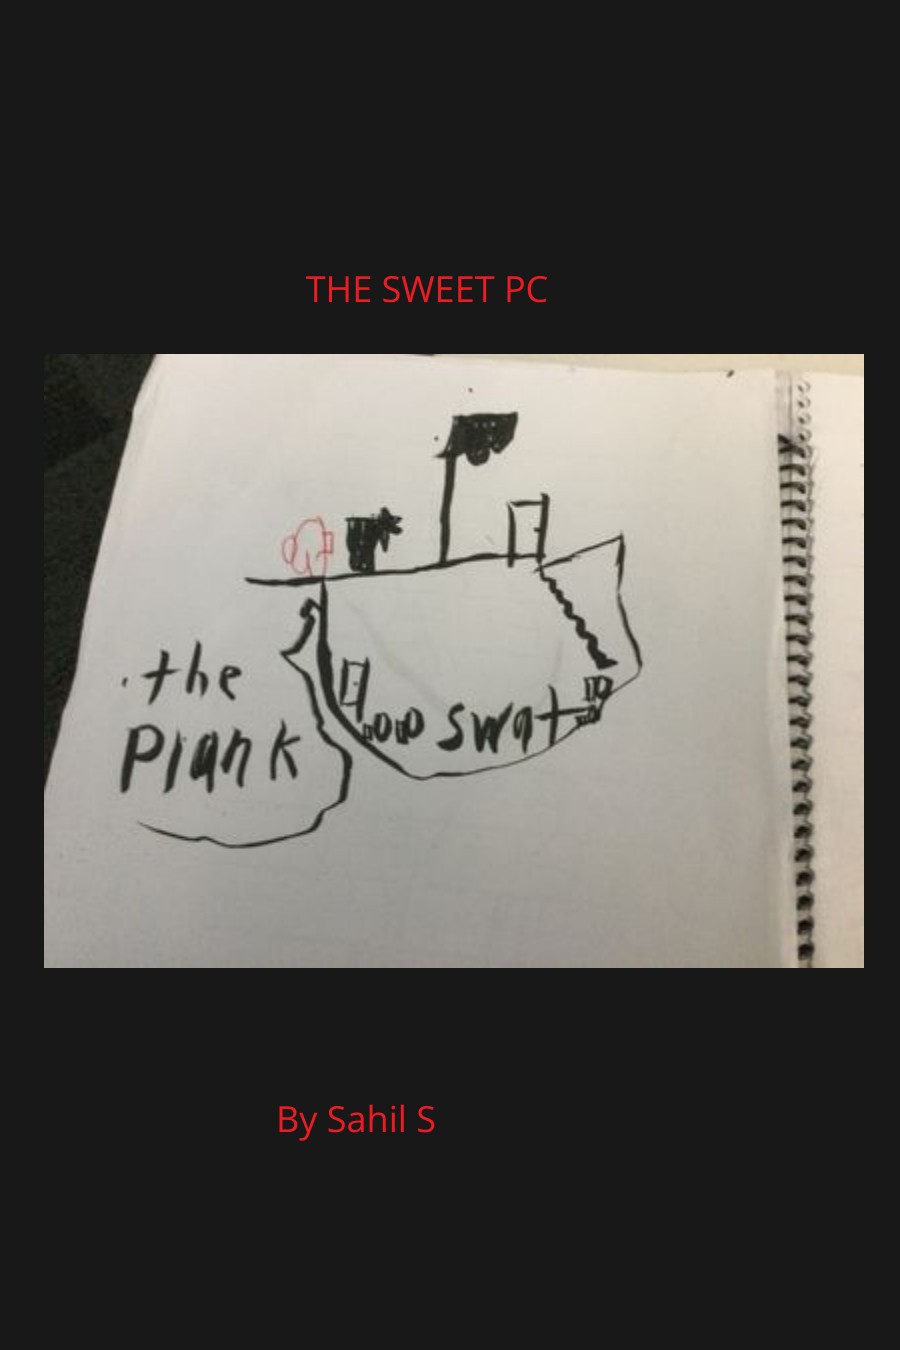 The Sweet PC by Sahil S